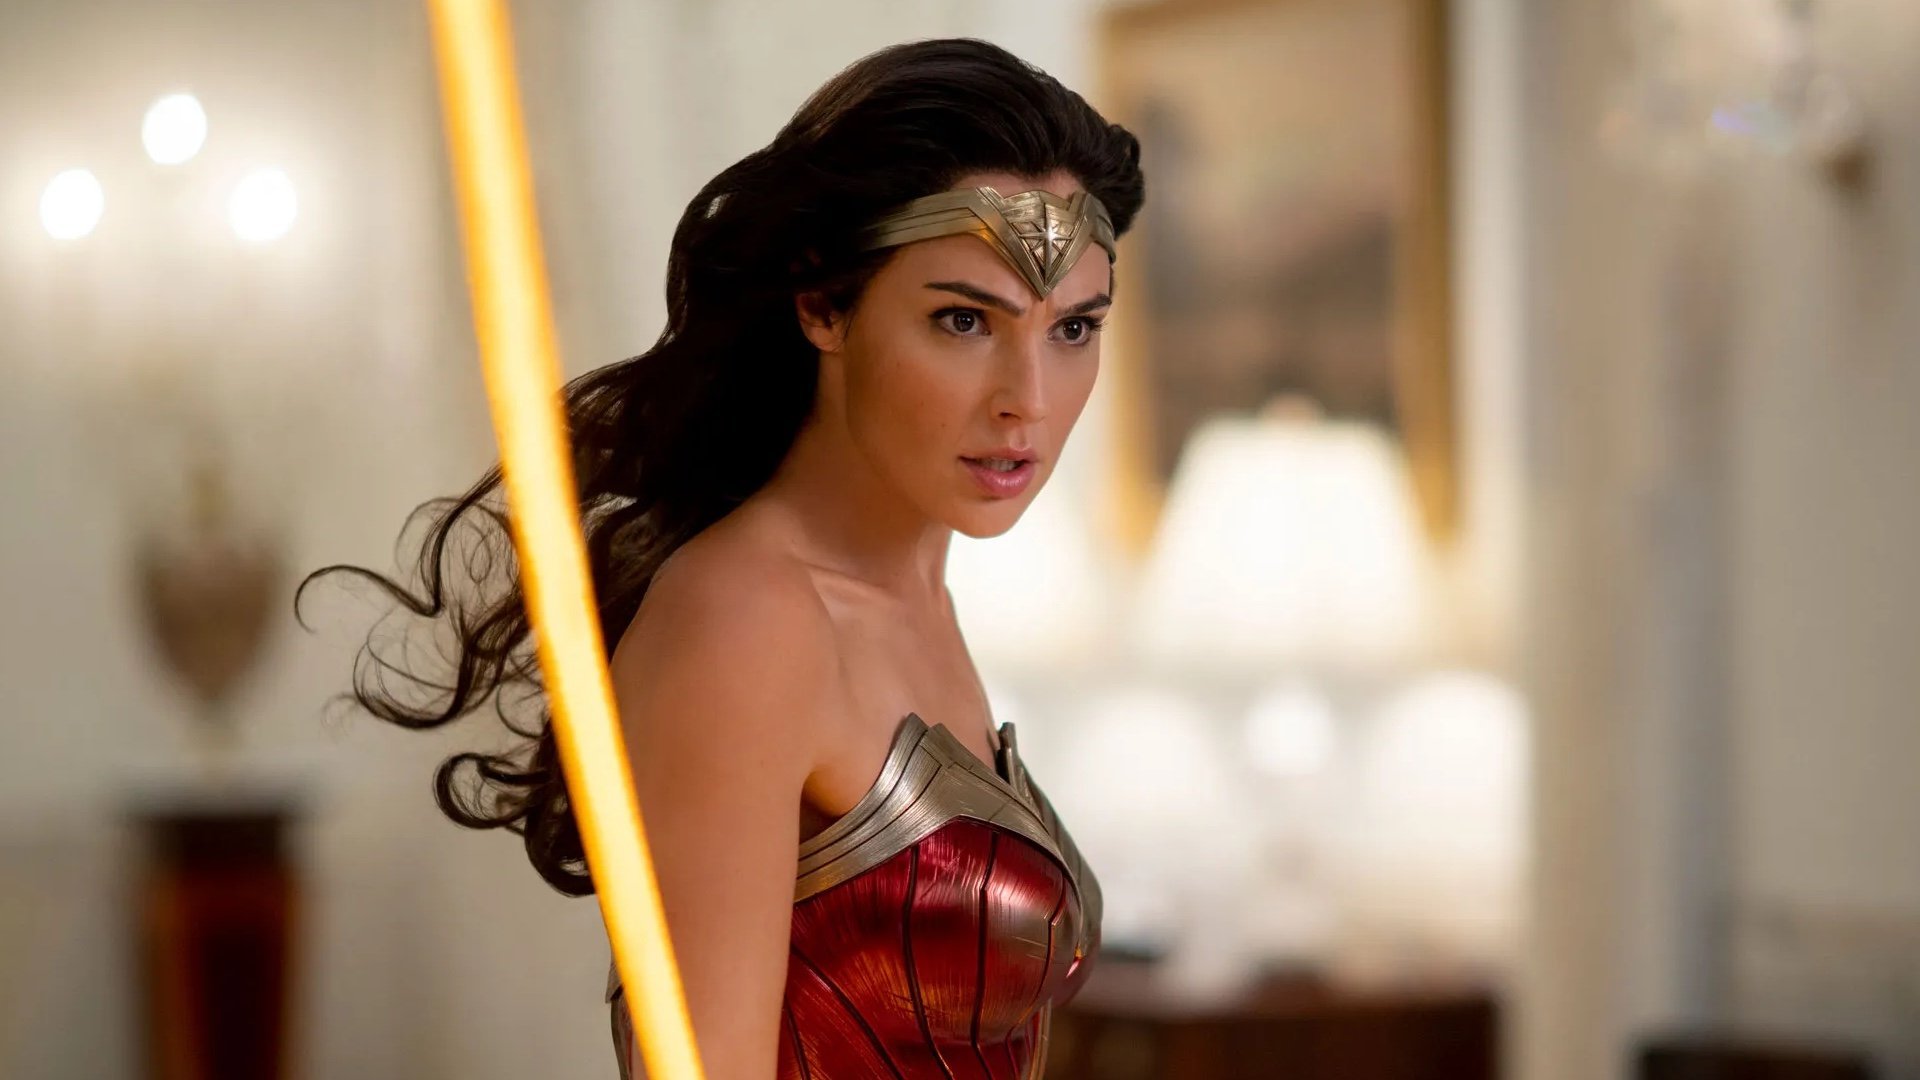 Wonder Woman 1984 unveils brand new poster ahead of release